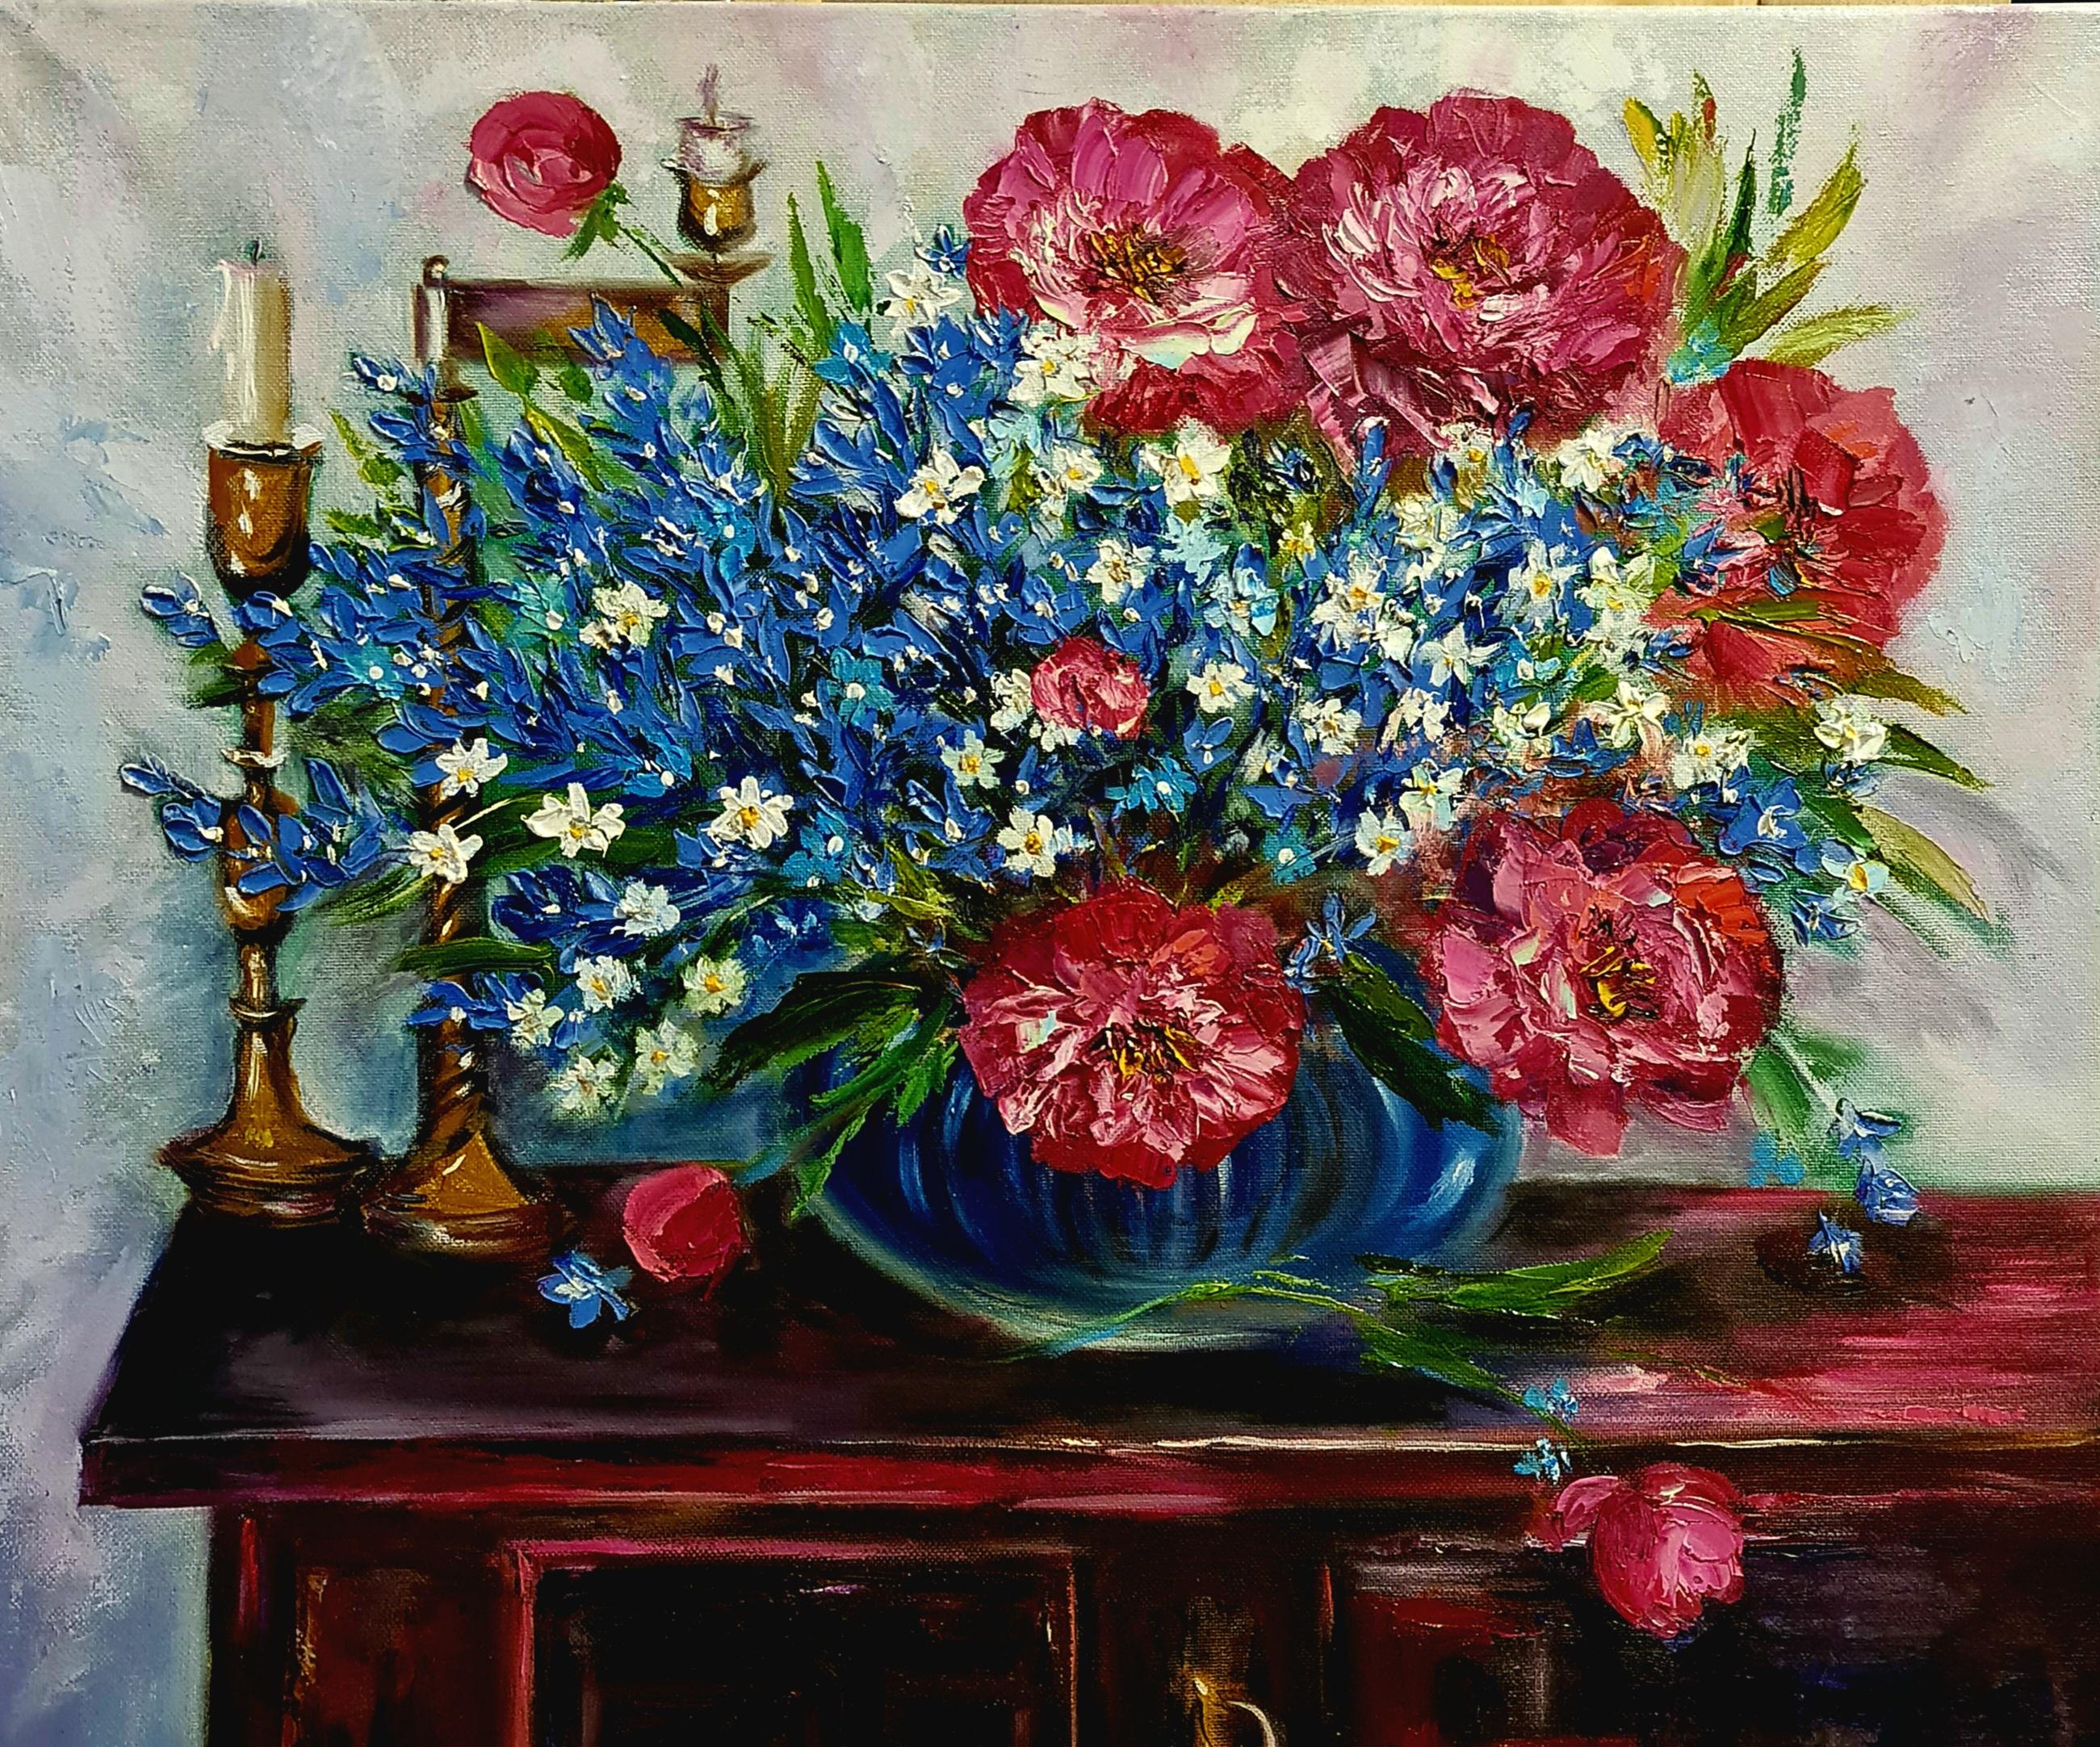 Burgundy peonies, blue flowers in a vase.Candles and antique table. - Expressionist Painting by Lilya Volskaya